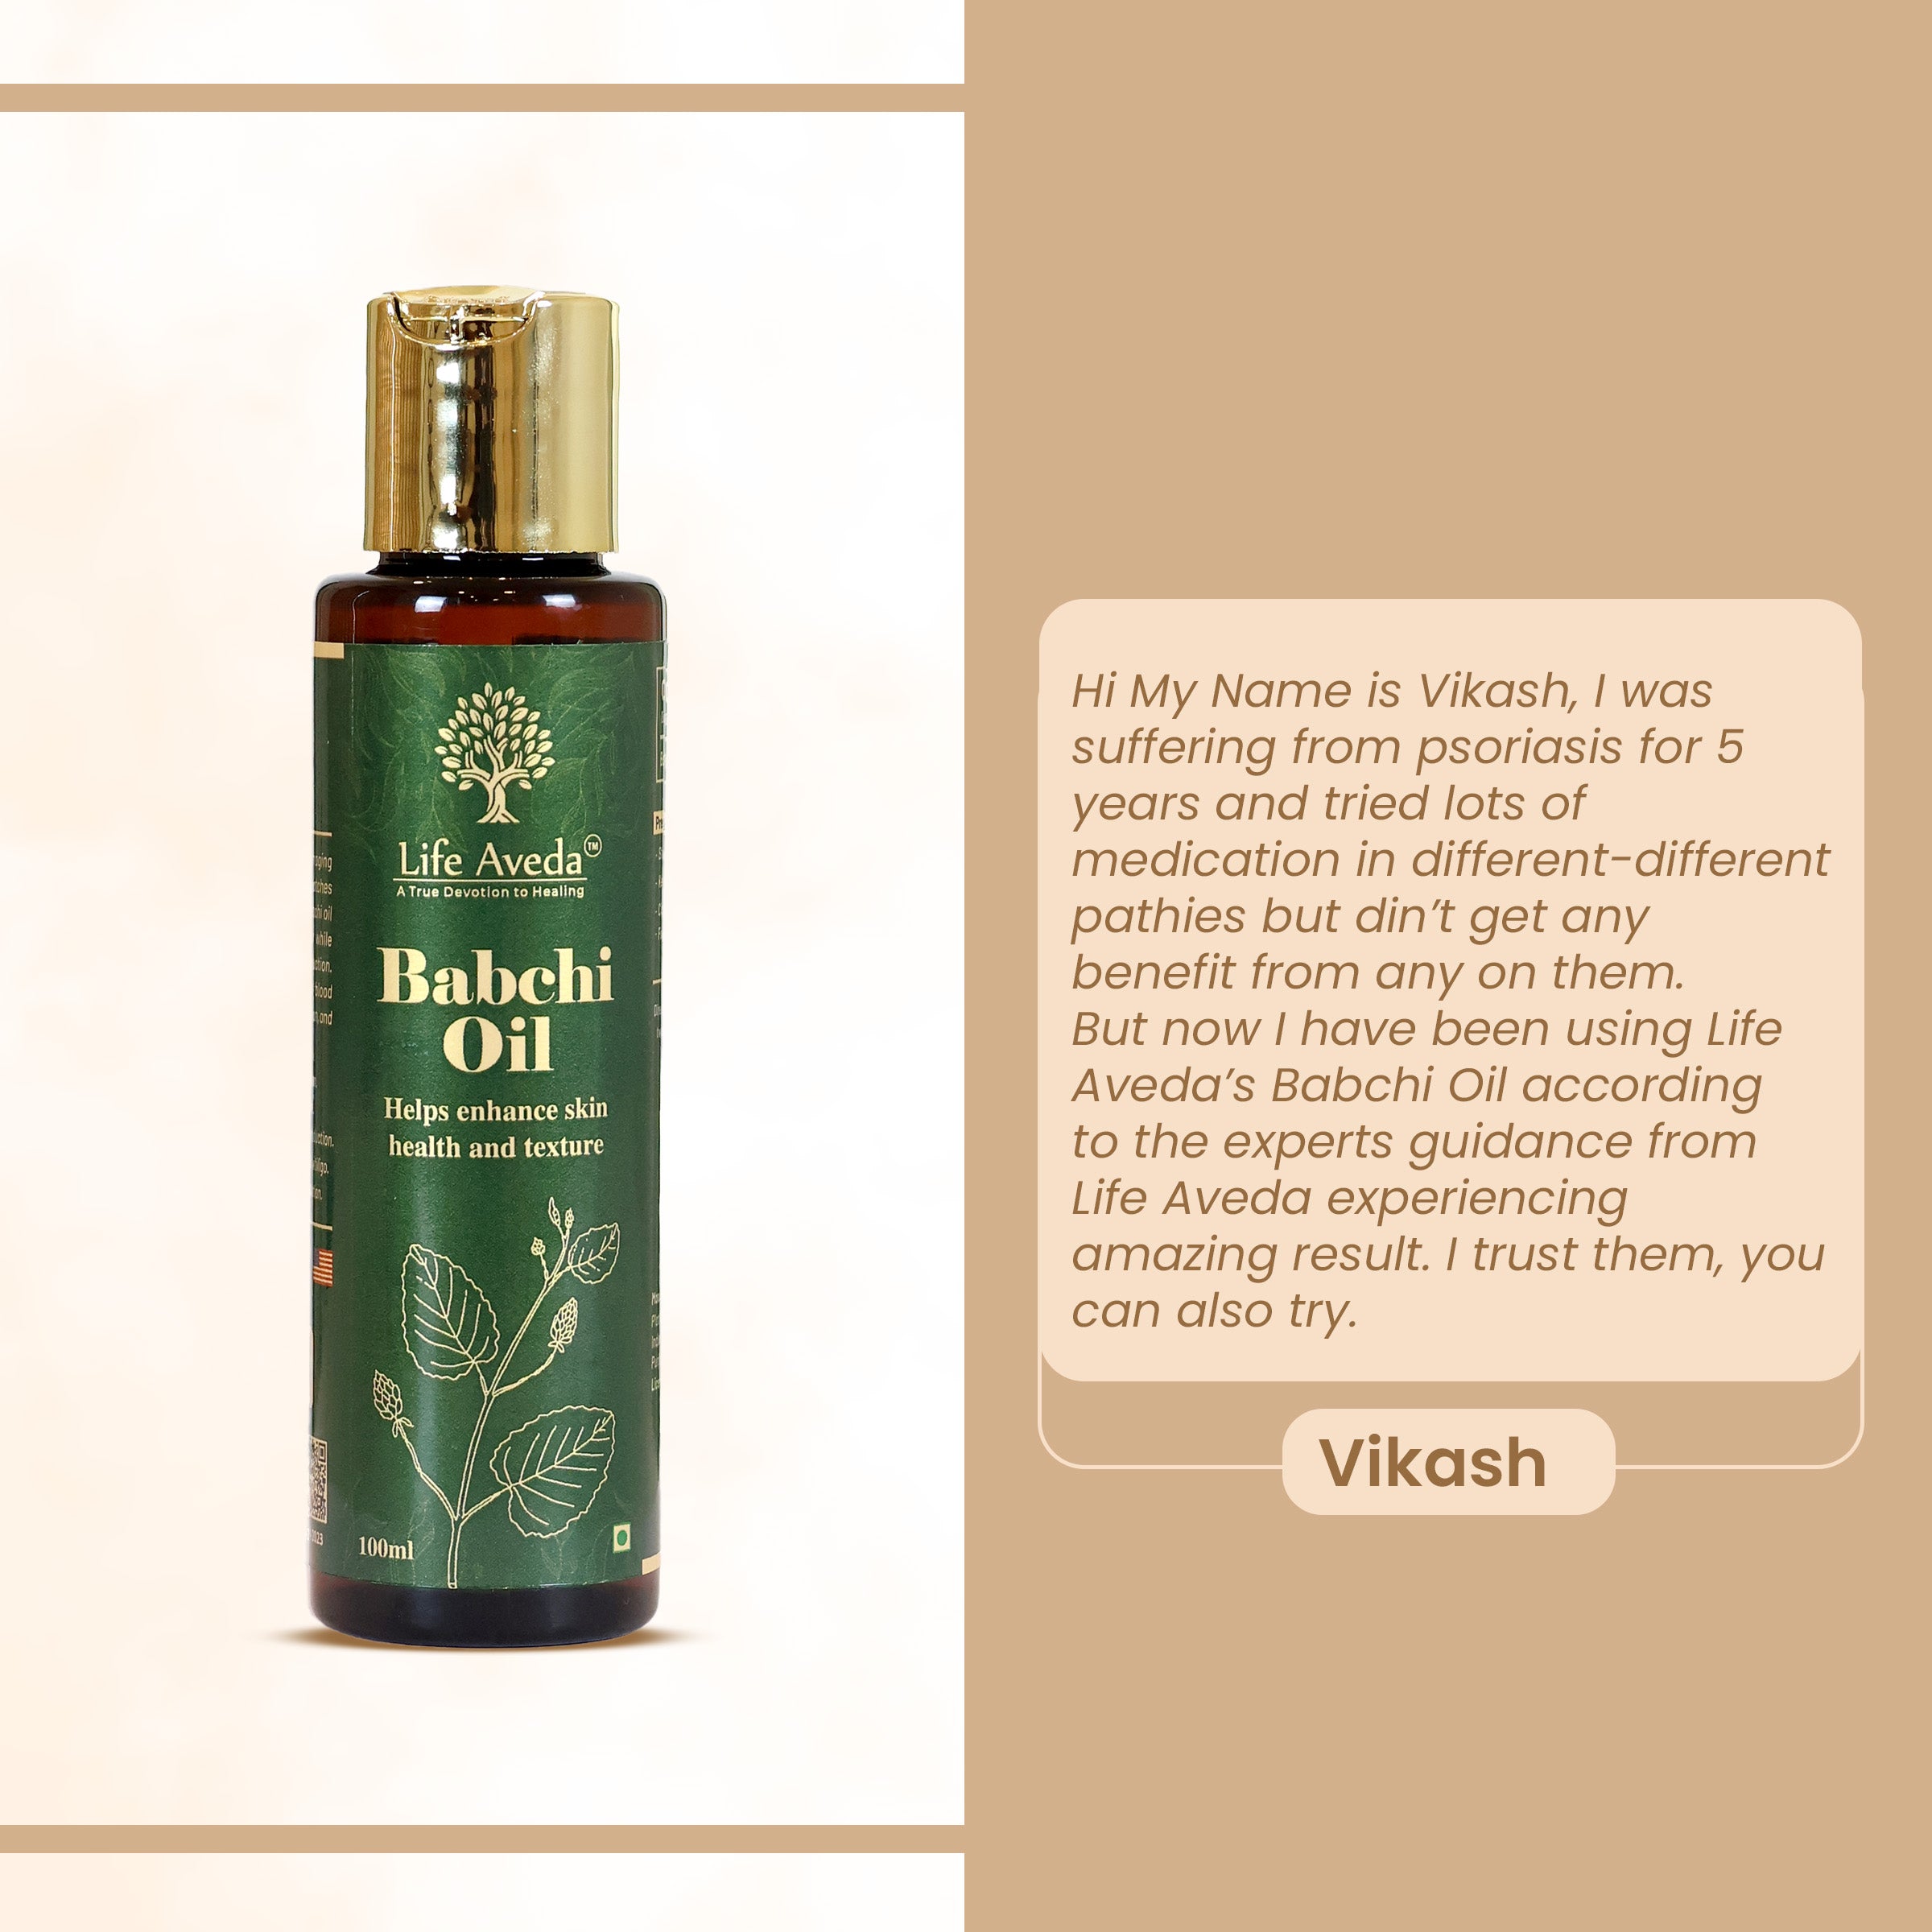 Life Aveda Babchi Oil Health Patient Review